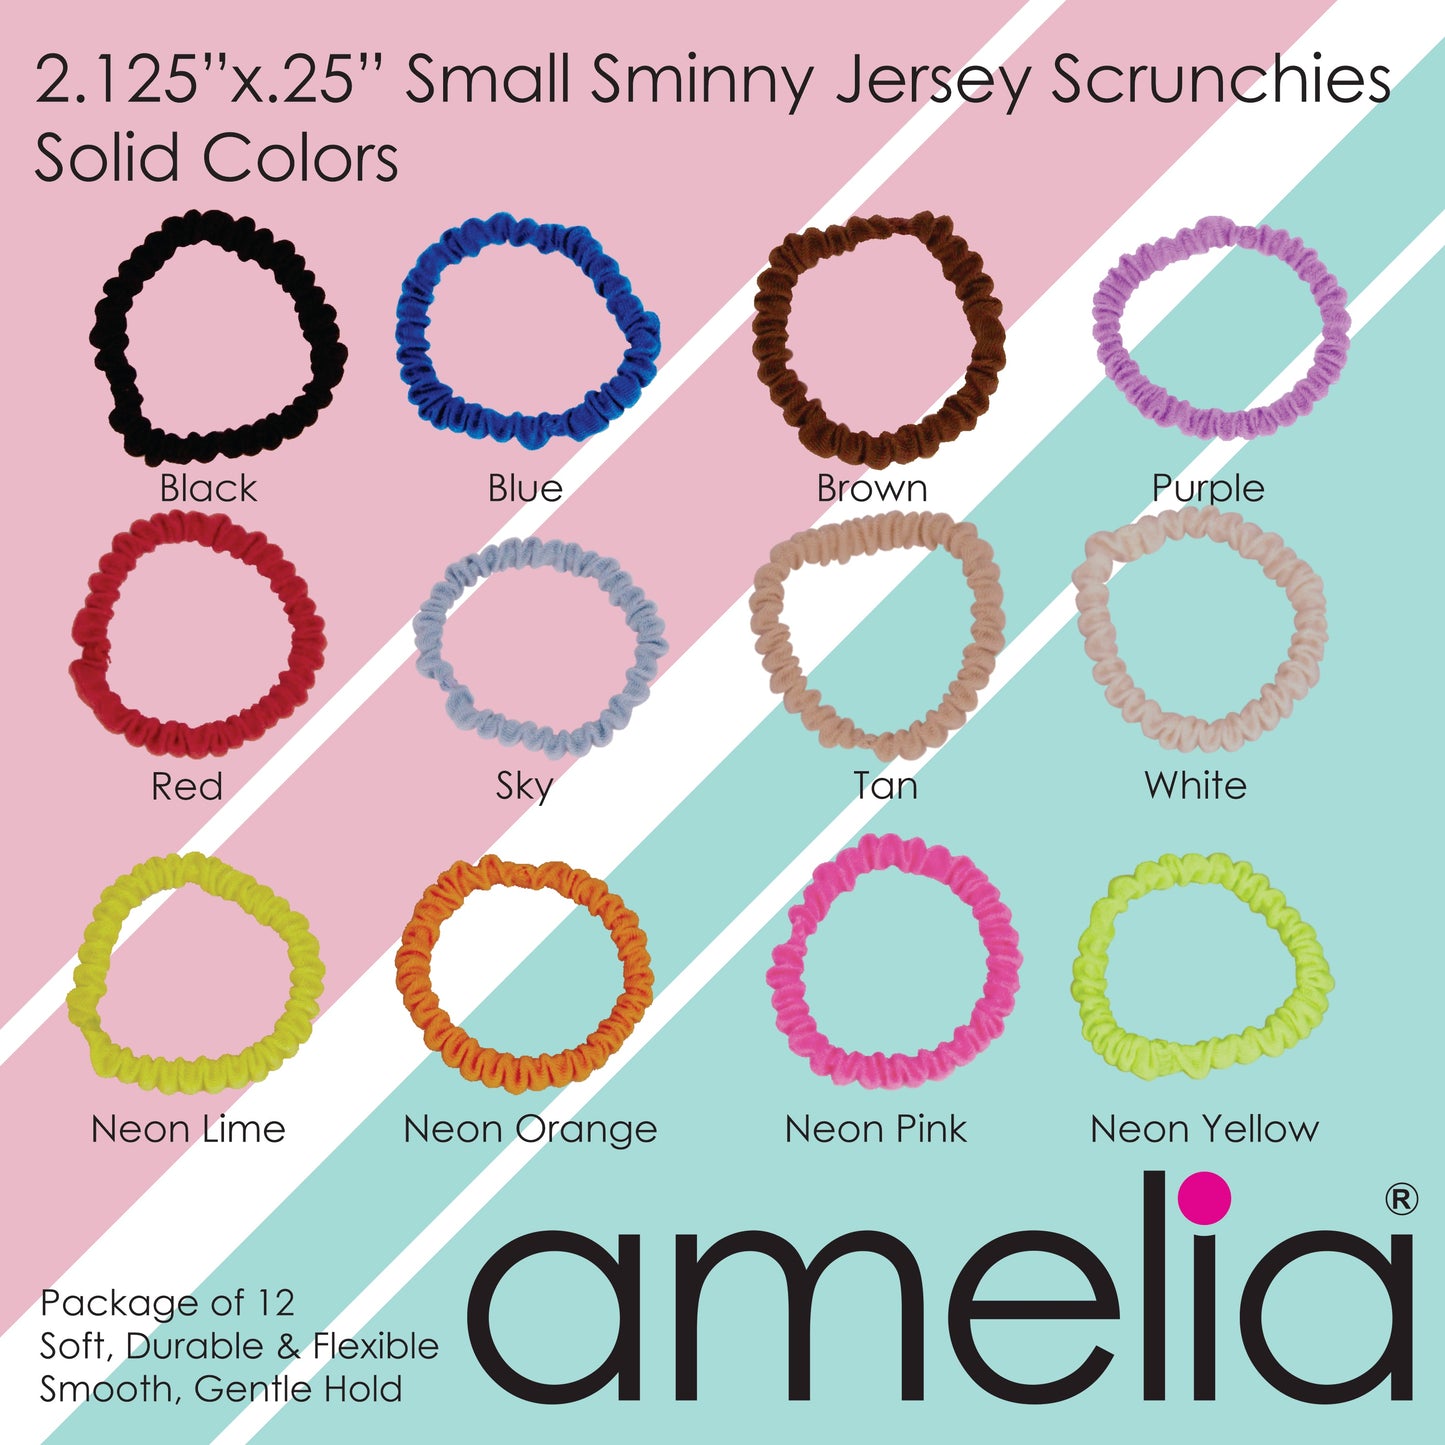 Amelia Beauty, Black and White Dot Mix Skinny Jersey Scrunchies, 2.125in Diameter, Gentle on Hair, Strong Hold, No Snag, No Dents or Creases. 12 Pack